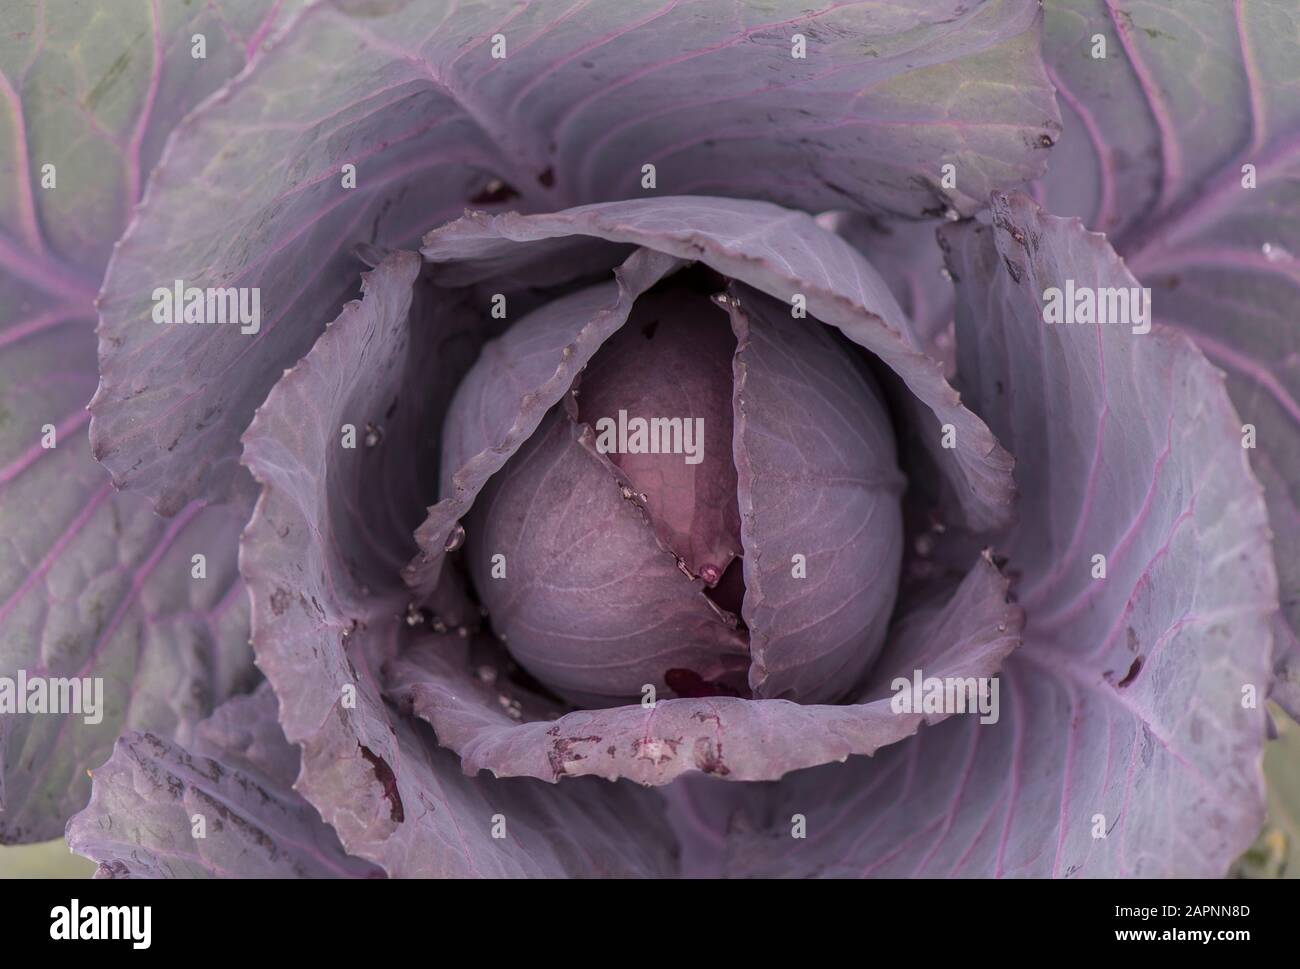 Red cabbage growing in vegetable garden. Stock Photo